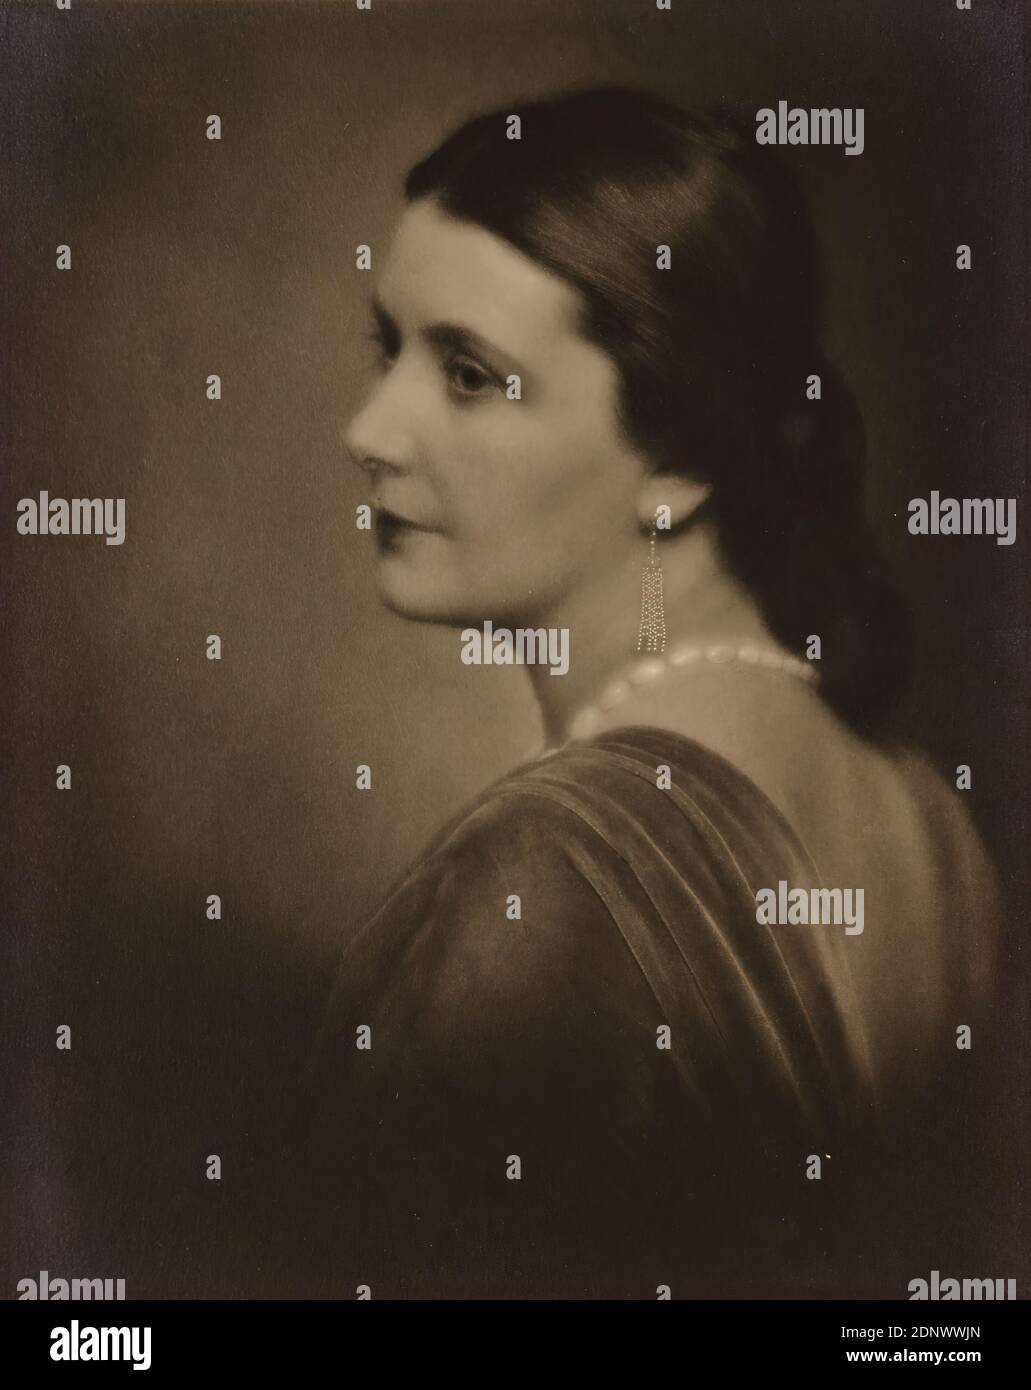 Nicola Perscheid, Lil Dagover - film actress, Staatliche Landesbildstelle Hamburg, collection on the history of photography, silver gelatine paper, black and white positive process, image size: height: 24.10 cm; width: 19.10 cm, signed: recto u. re. on the cardboard: in brown ink: Lil Dagover - film actress, address stamp of the photographer, portrait photography, studio/studio photography, portrait, actor, actress, jewelry, jewels, Lil Dagover Stock Photo